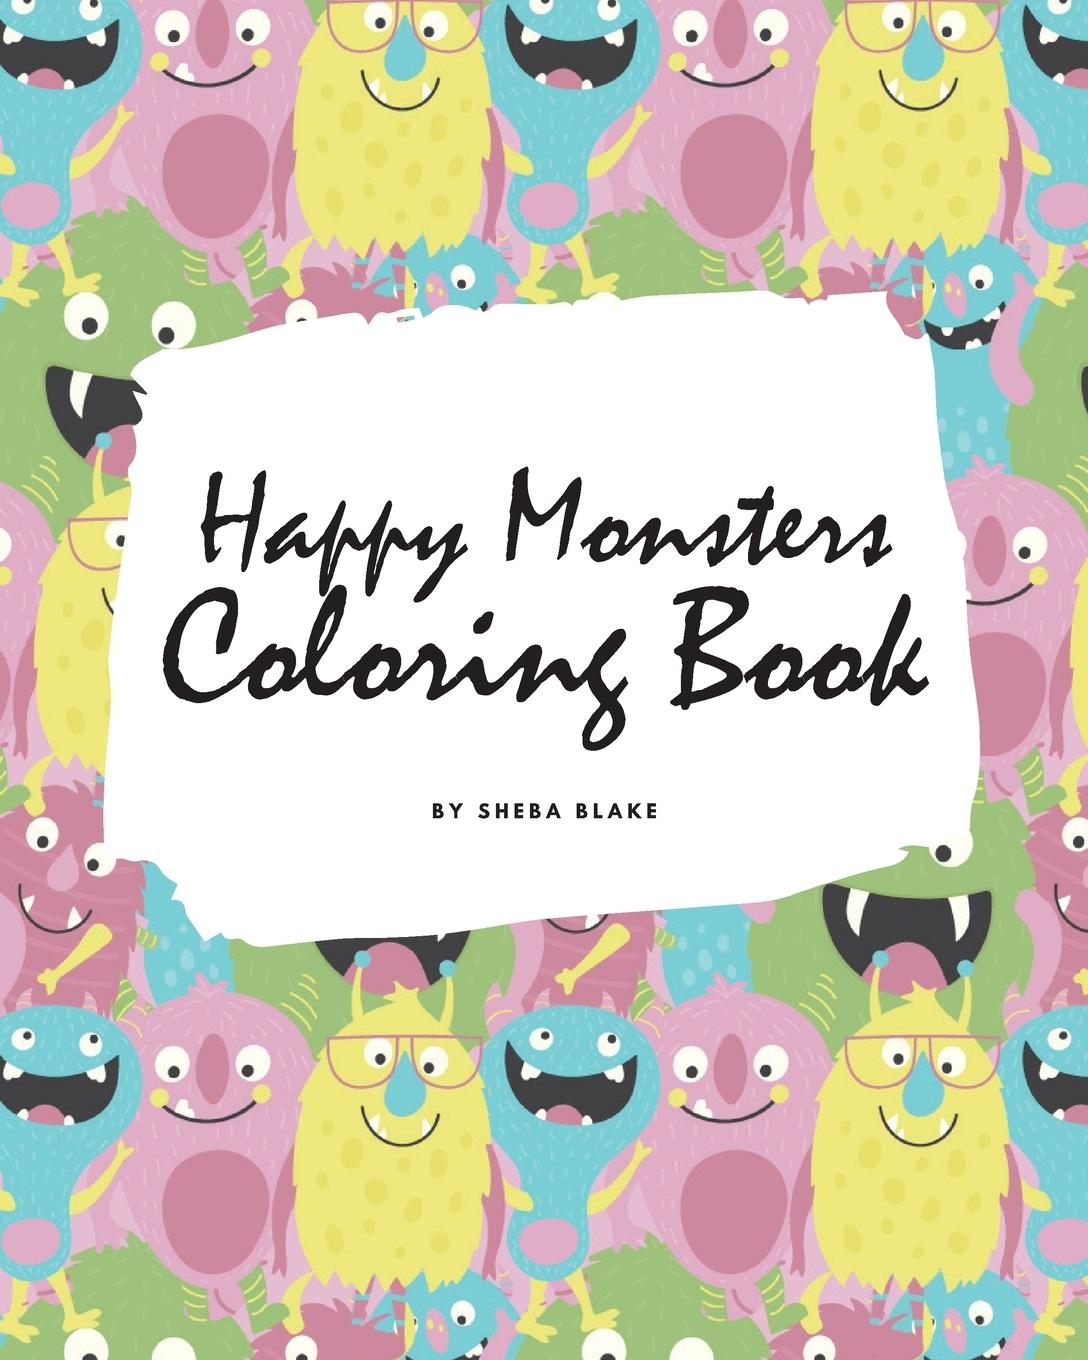 Книга Happy Monsters Coloring Book for Children (8x10 Coloring Book / Activity Book) 